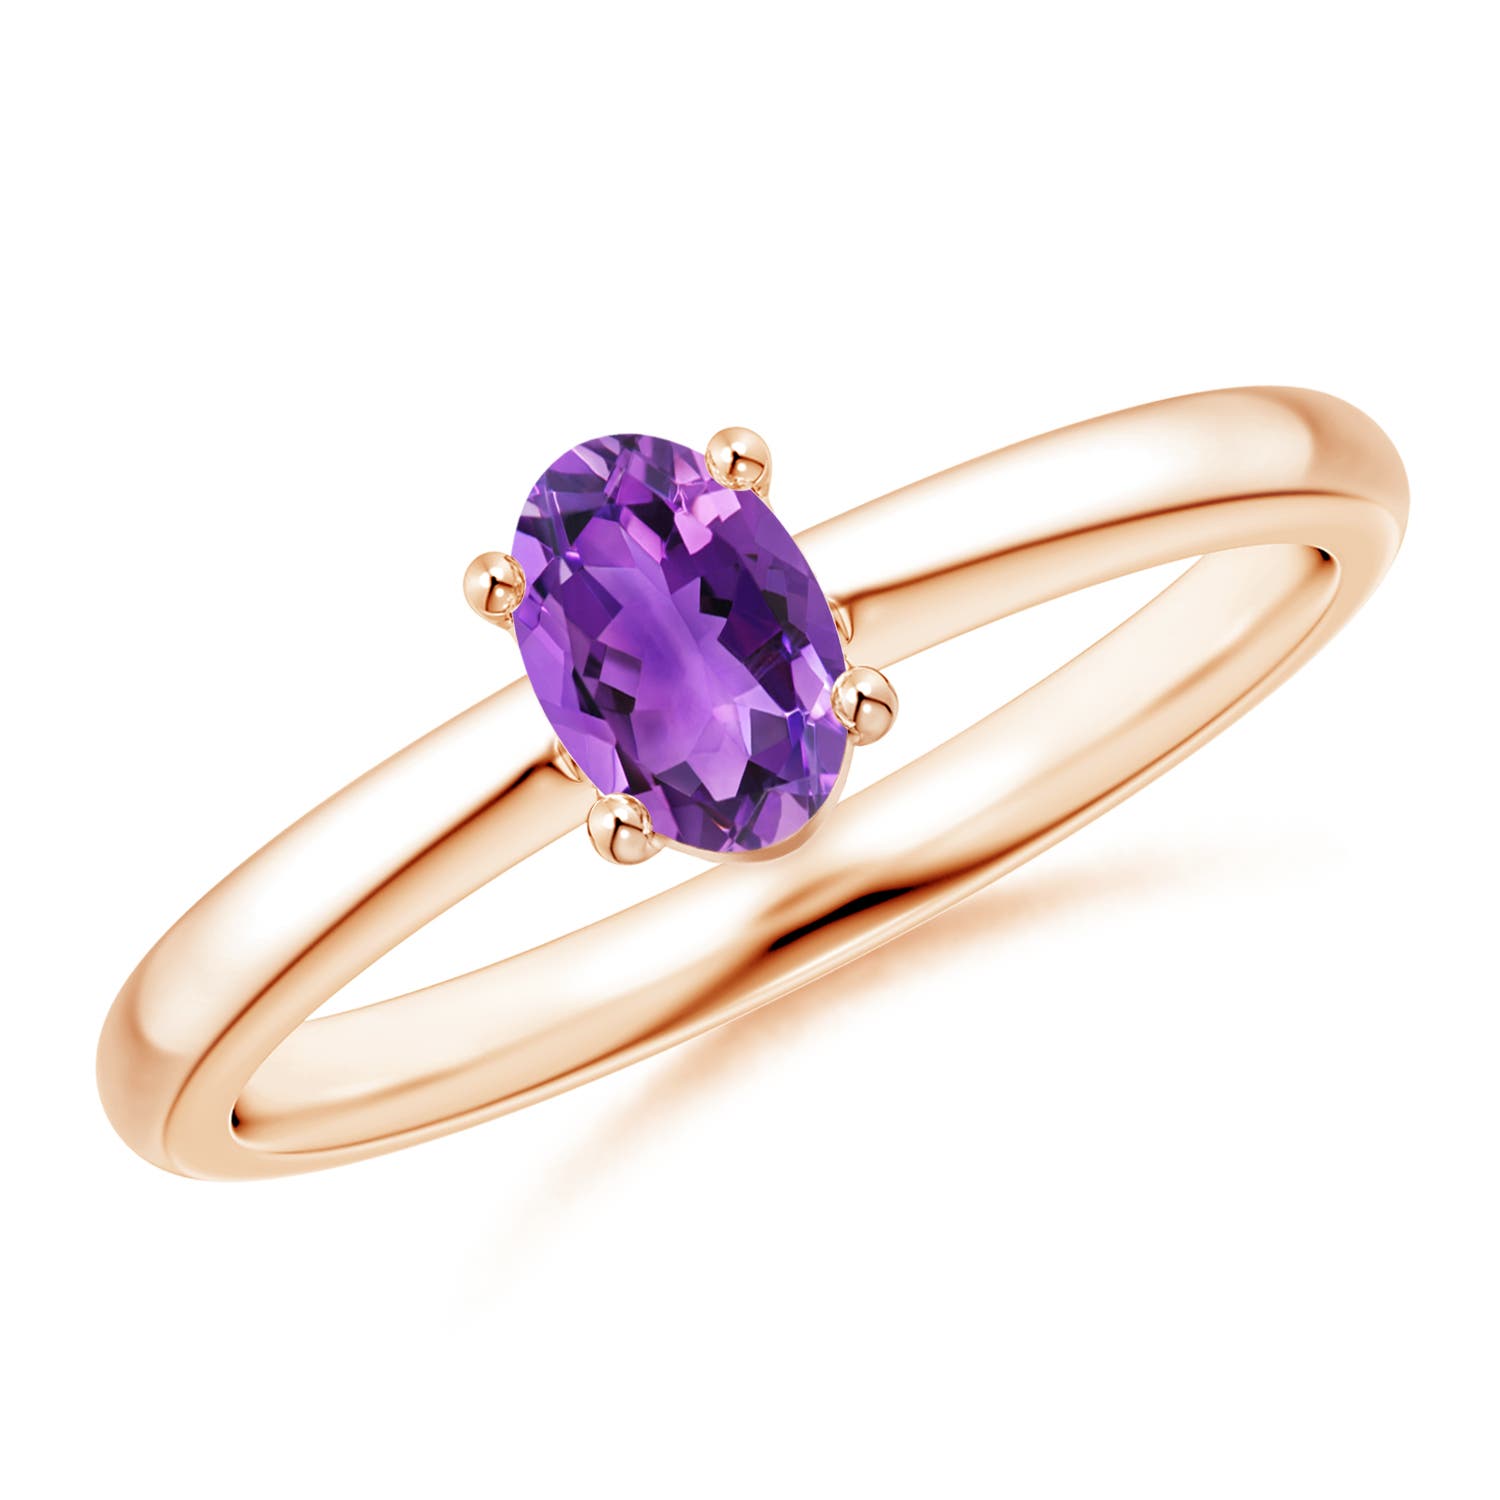 AAA - Amethyst / 0.4 CT / 14 KT Rose Gold